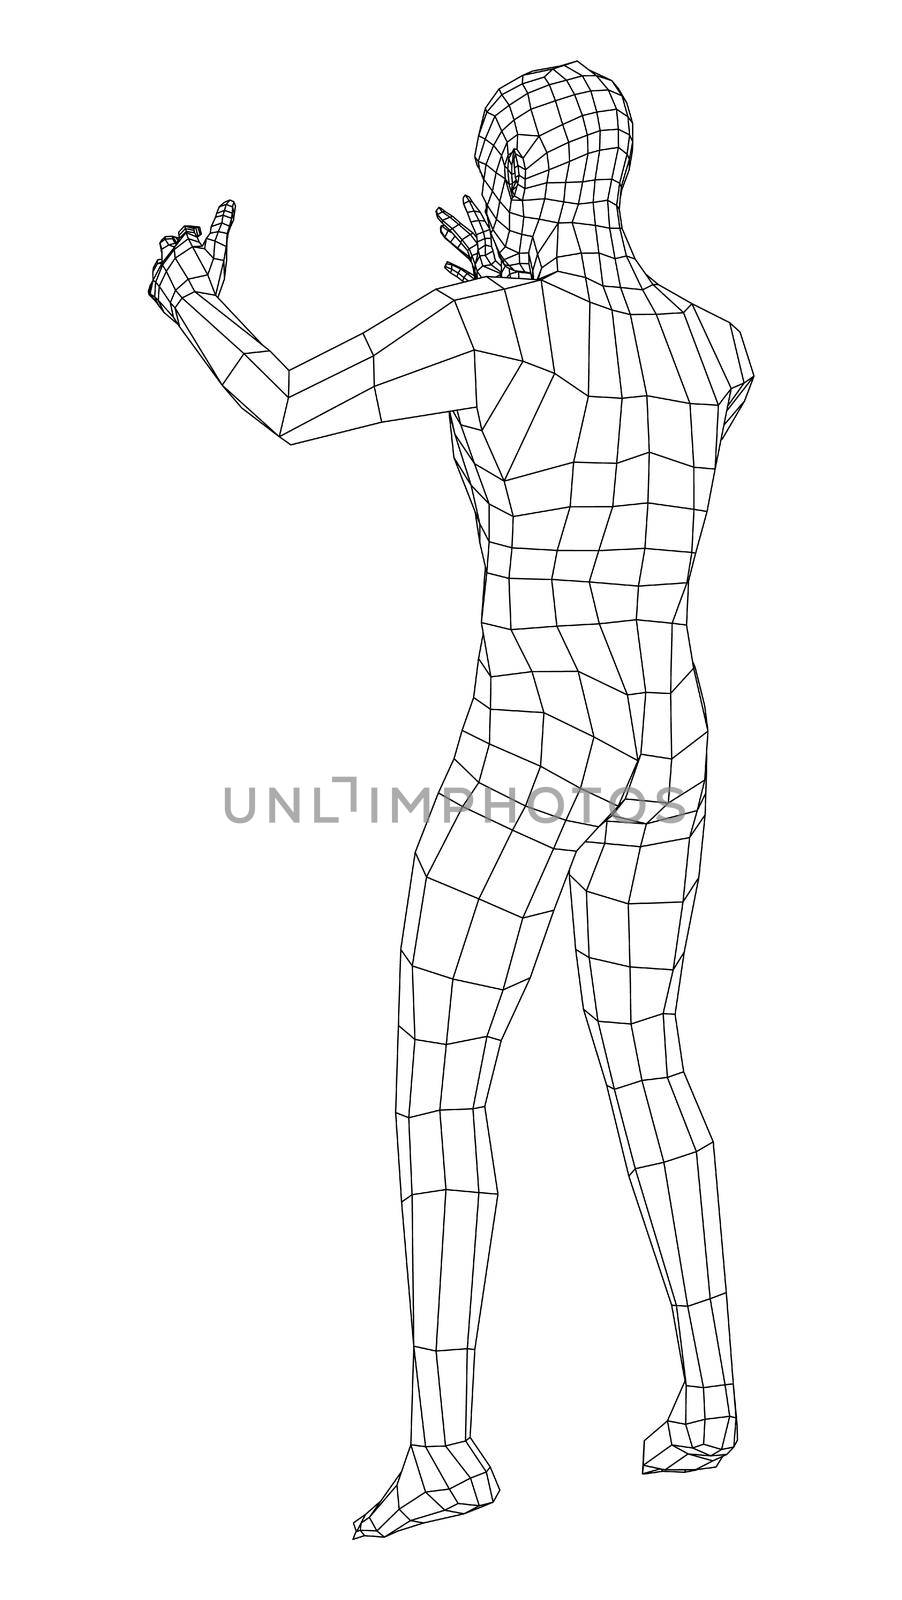 Wireframe jumping man. 3d illustration by cherezoff